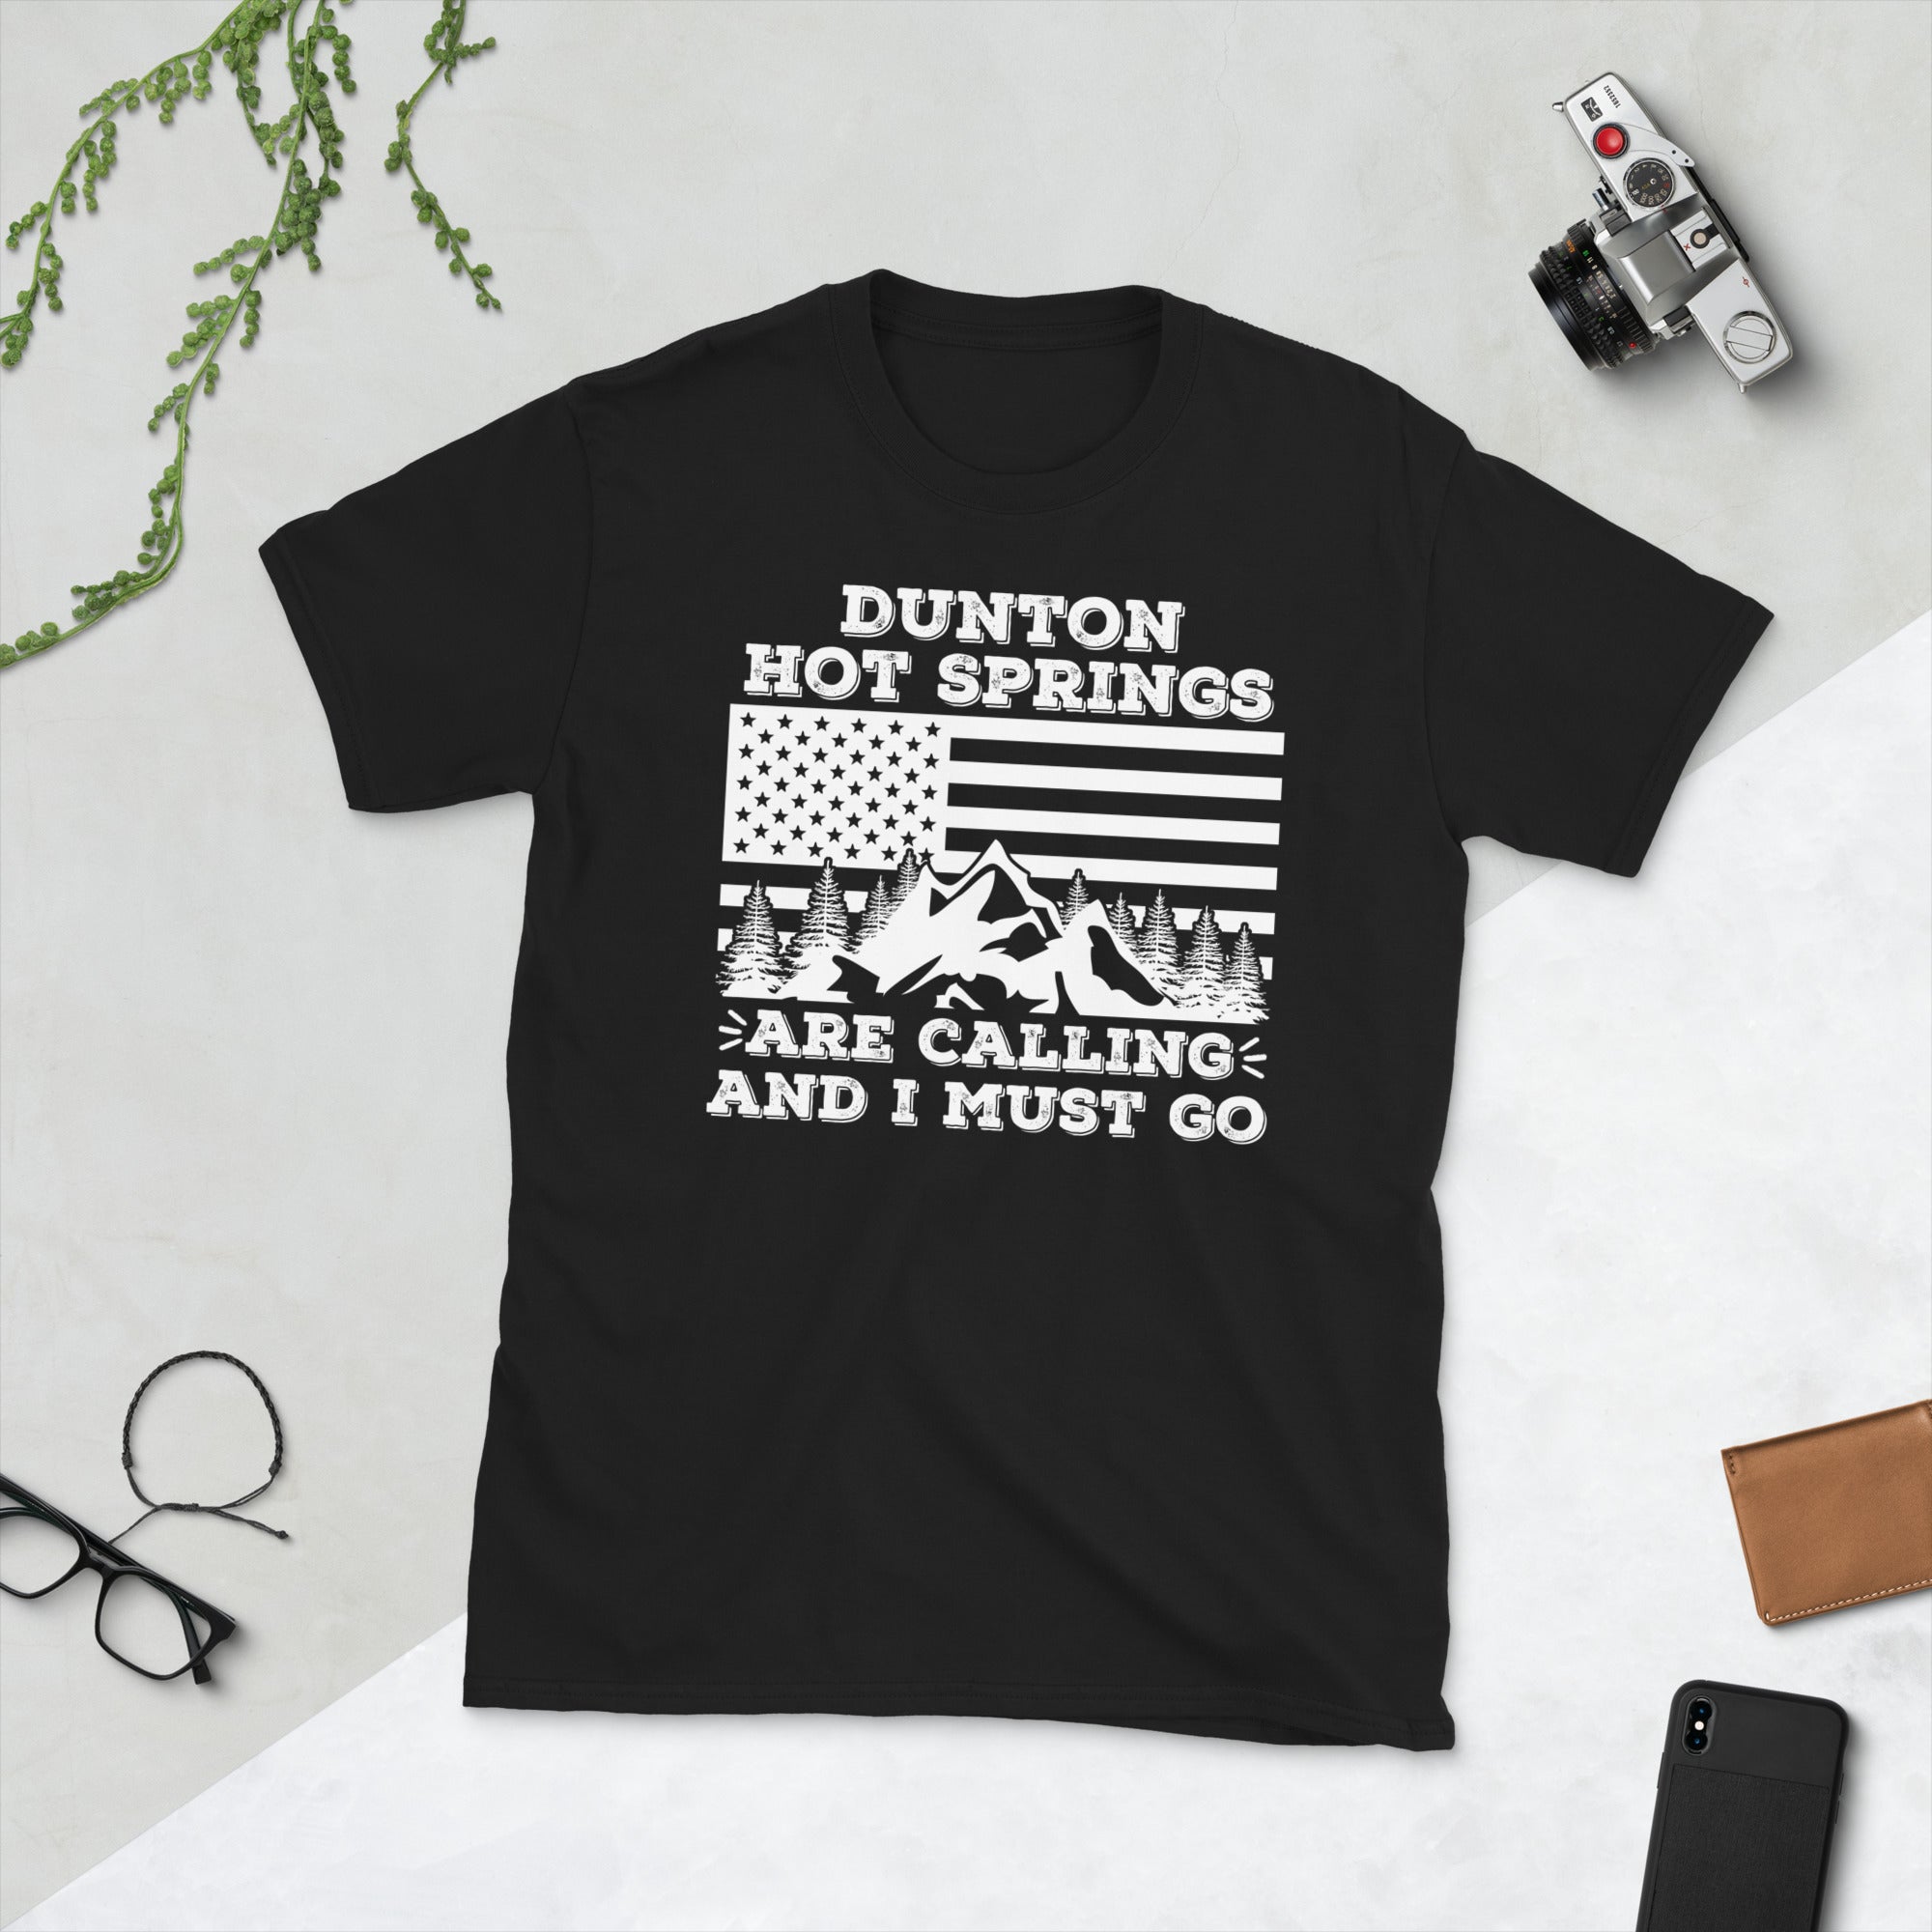 Dunton Hot Springs Are calling and i must go Shirt - Madeinsea©